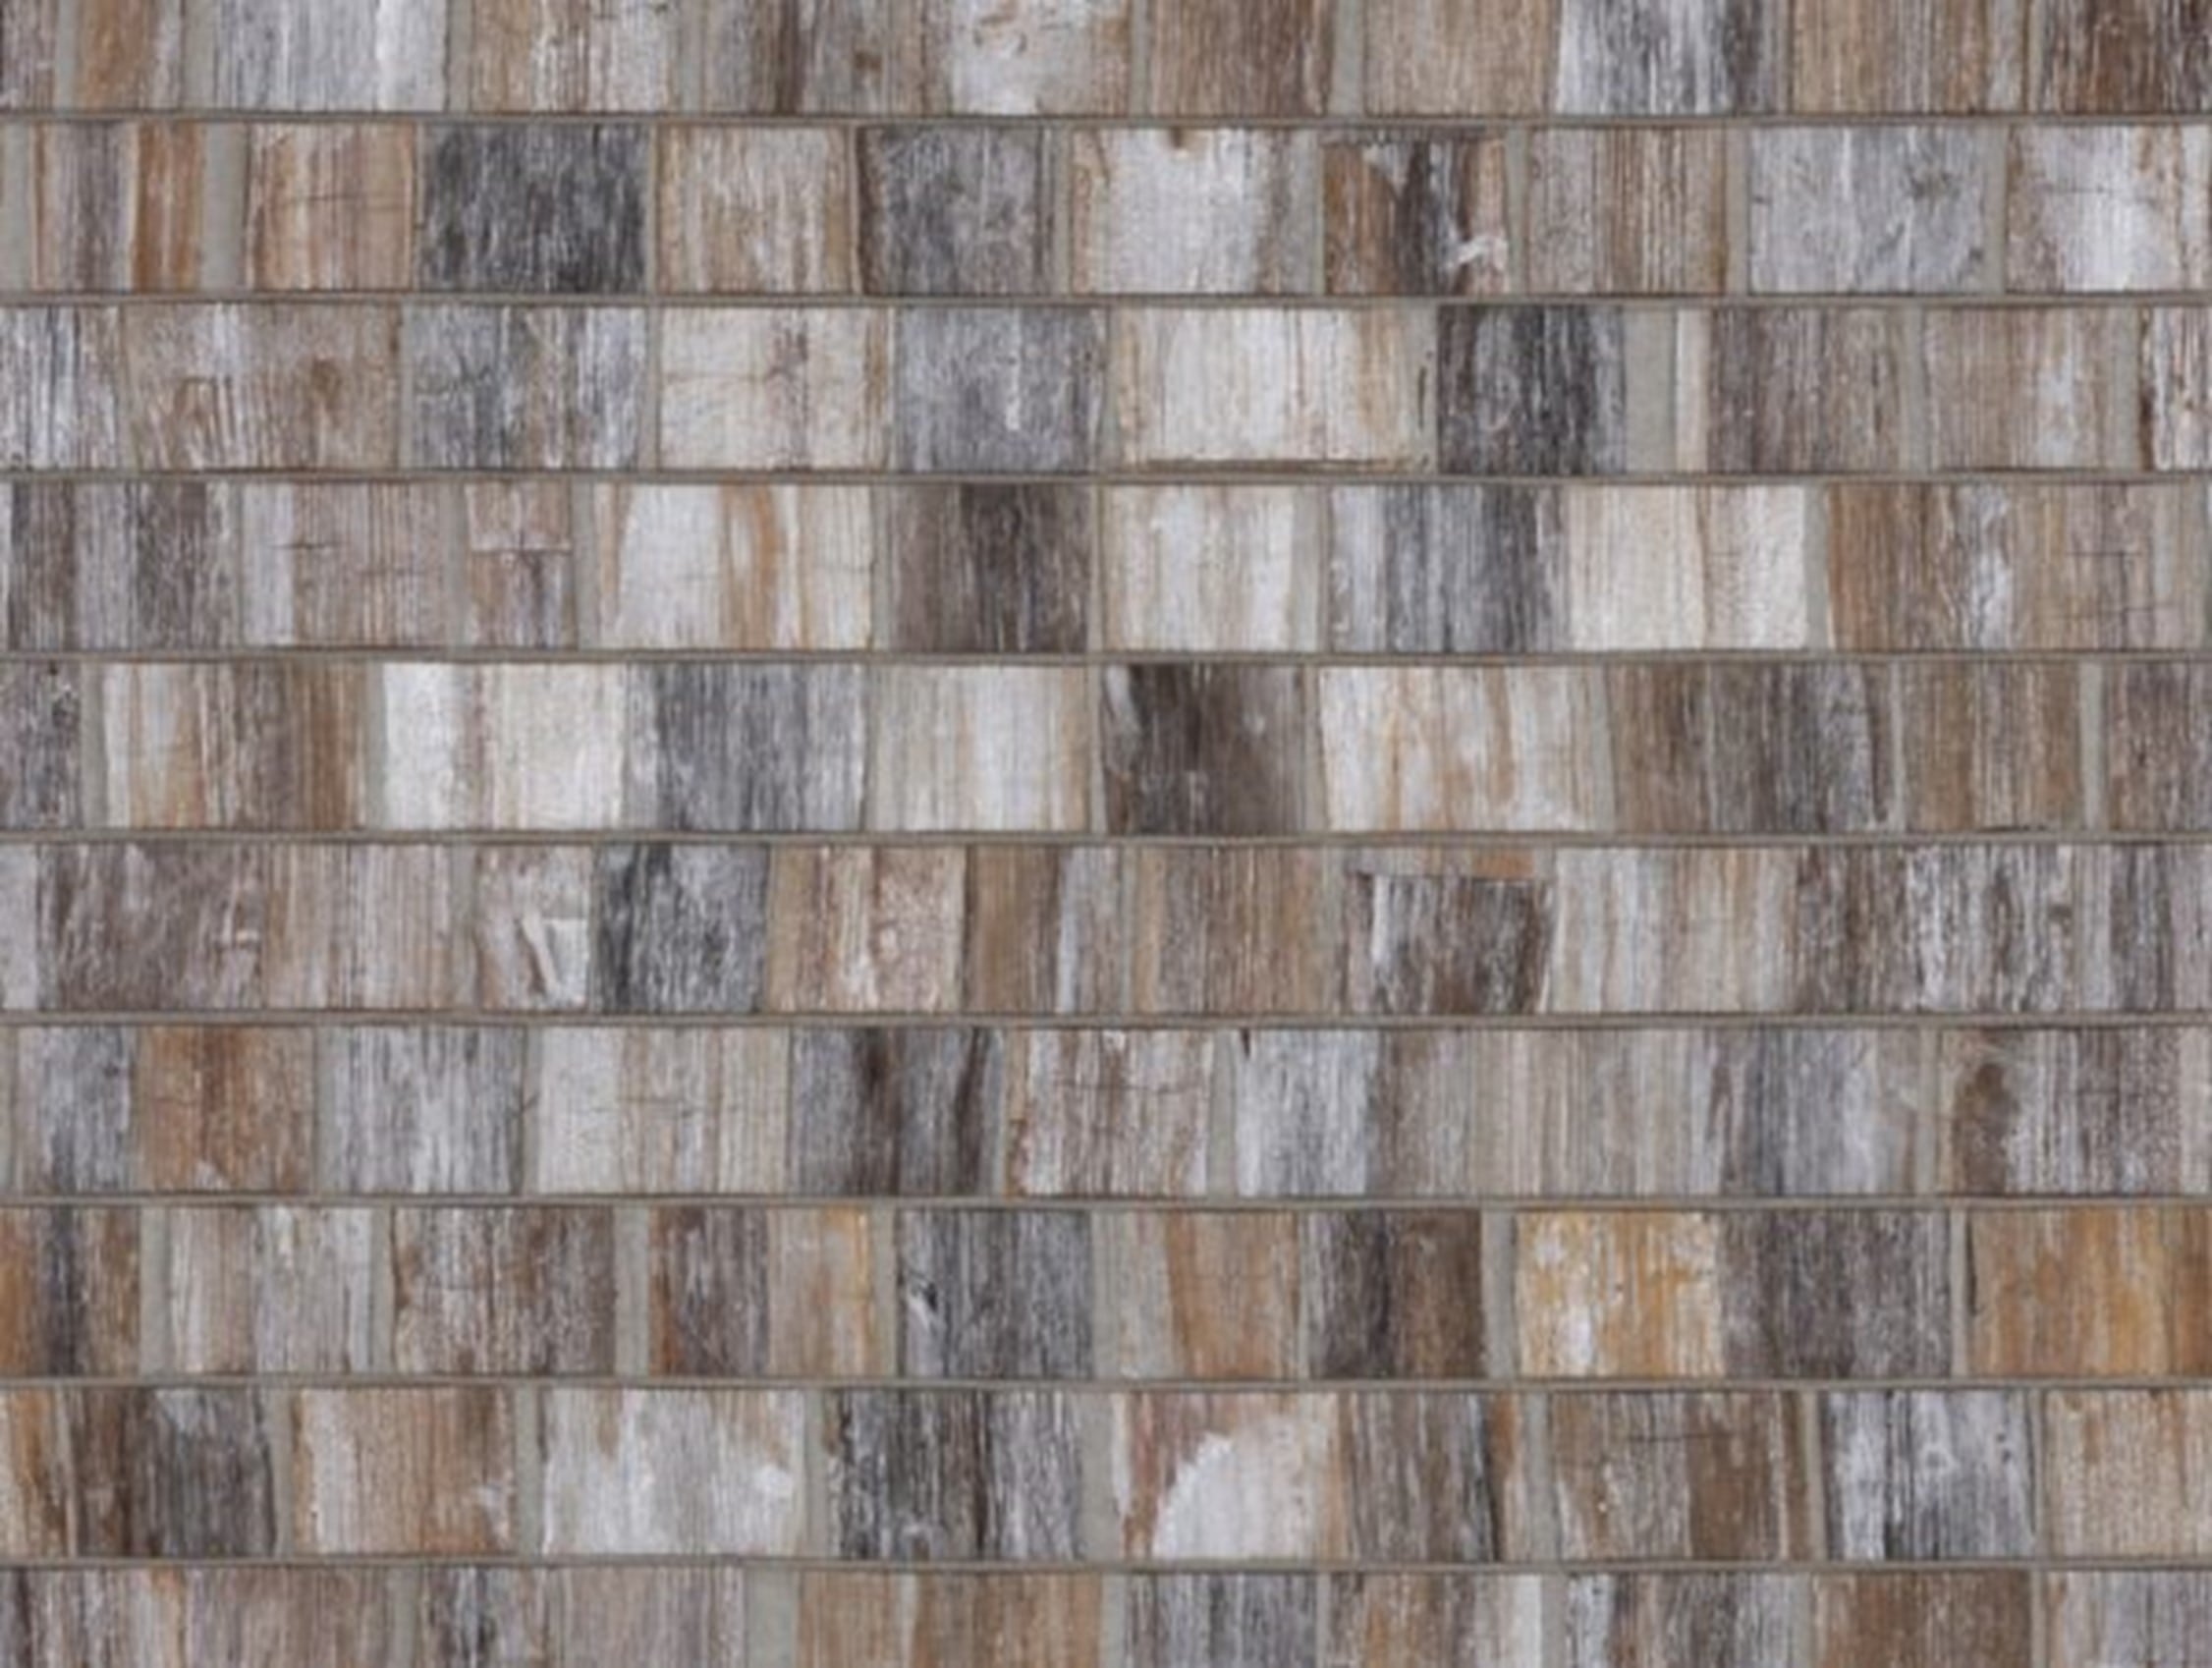 unique wallcoverings with natural wood look and include the warmth and comfort